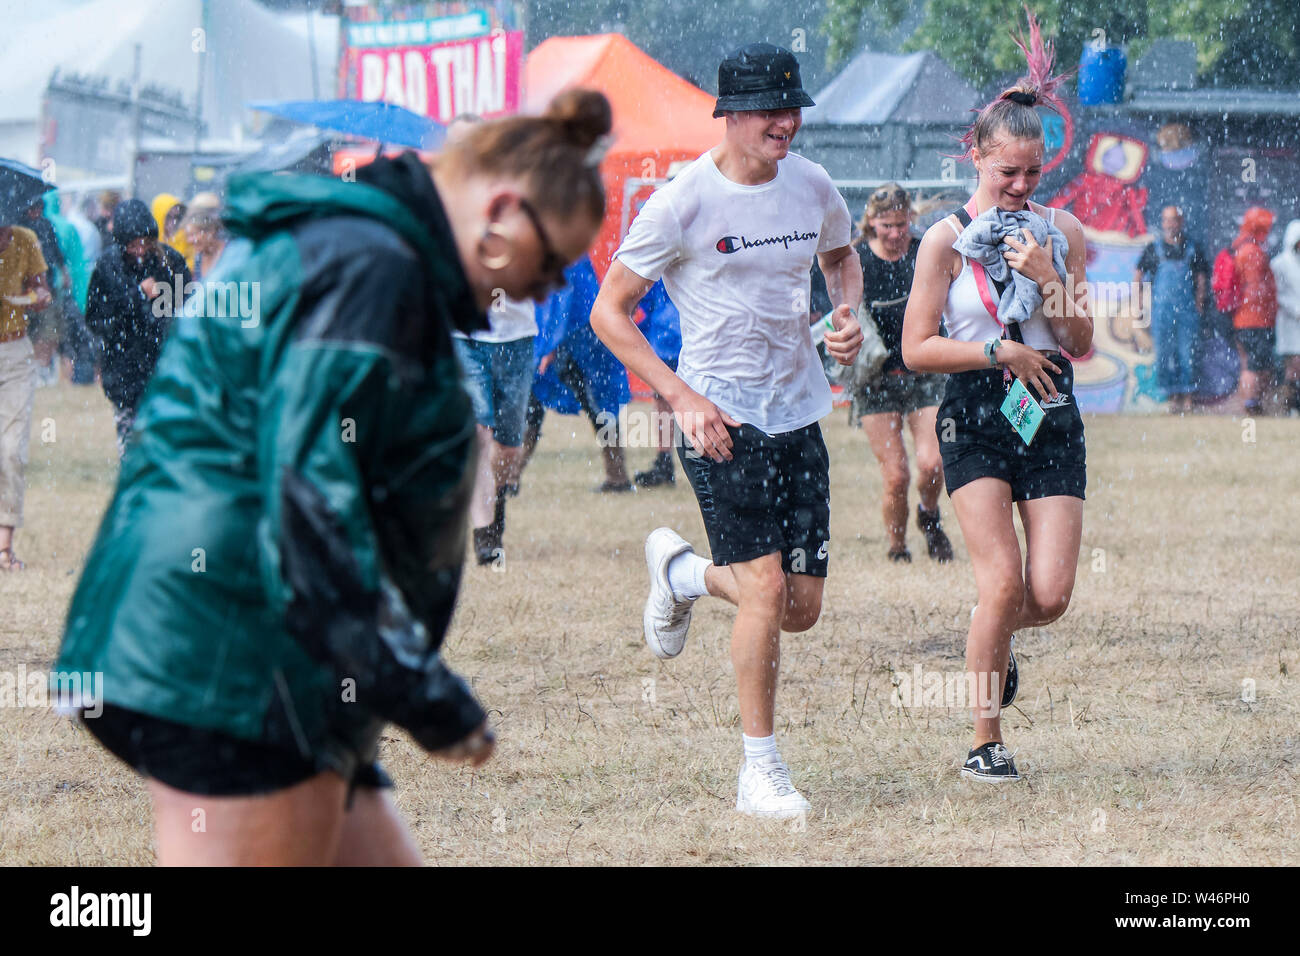 Henham Park, Suffolk, UK, , 20 July 2019. The rain falls and people dash for cover - The 2019 Latitude Festival. Credit: Guy Bell/Alamy Live News Credit: Guy Bell/Alamy Live News Credit: Guy Bell/Alamy Live News Credit: Guy Bell/Alamy Live News Stock Photo